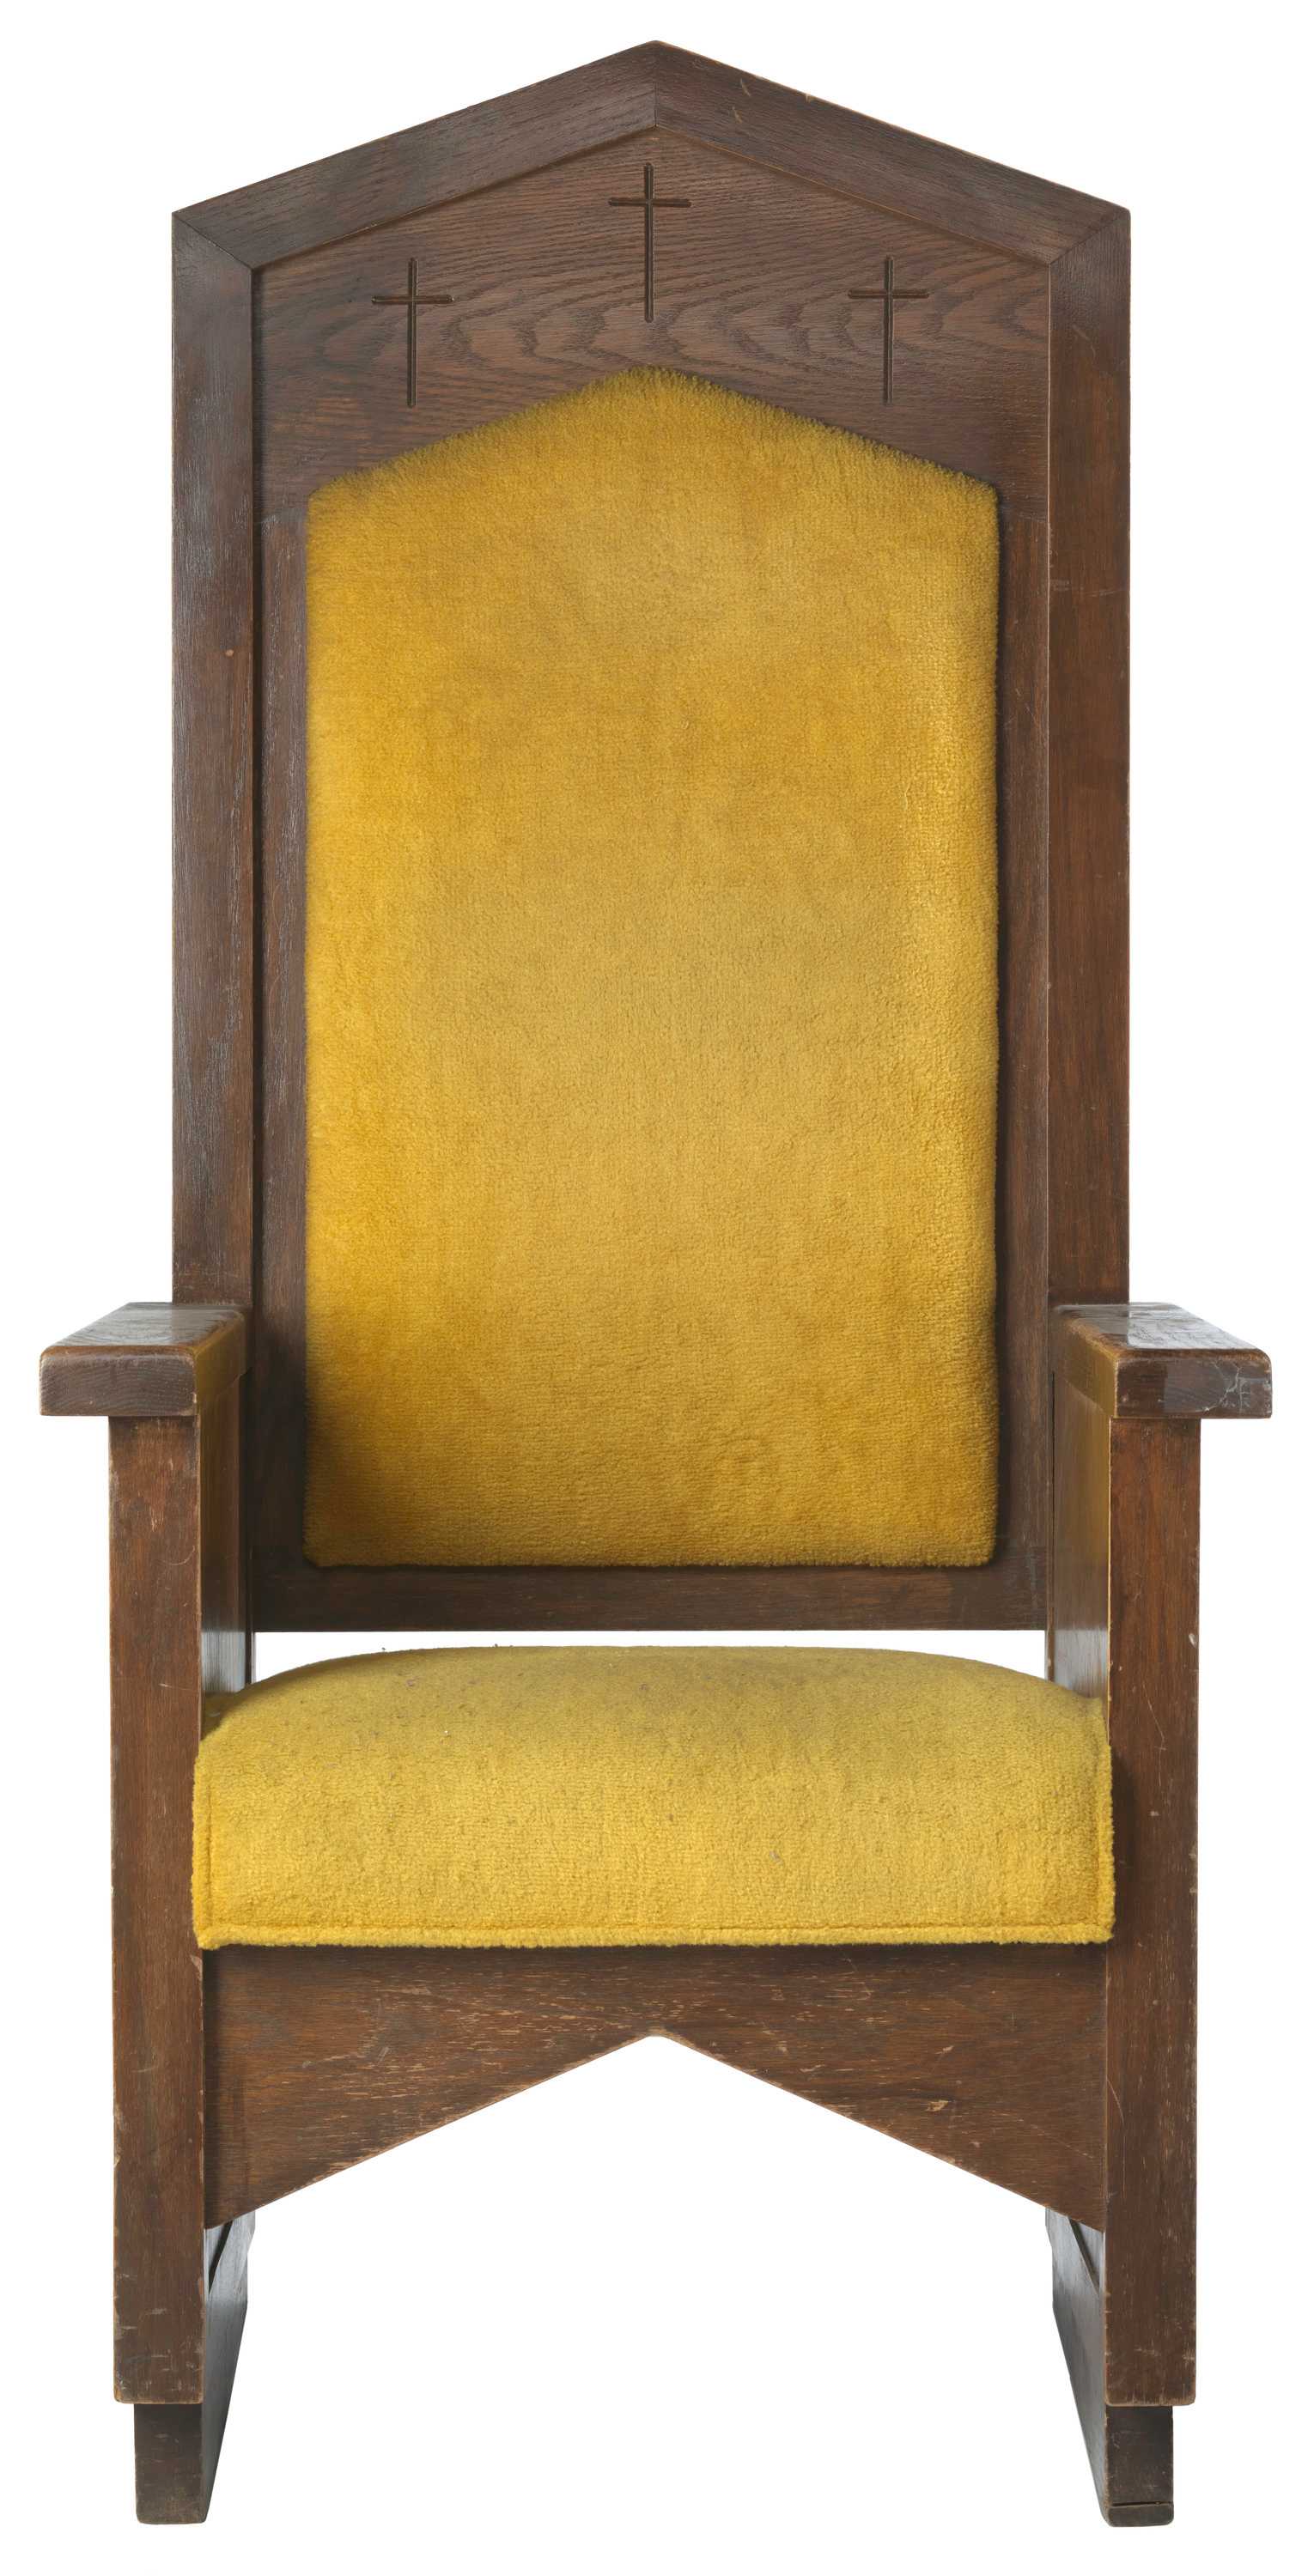 A chair made from dark brown wood featuring yellow back and seat cushions. Three crosses are engraved at the top of the chair. The back of the chair is consistent in design with the church archway, podium, and windows.